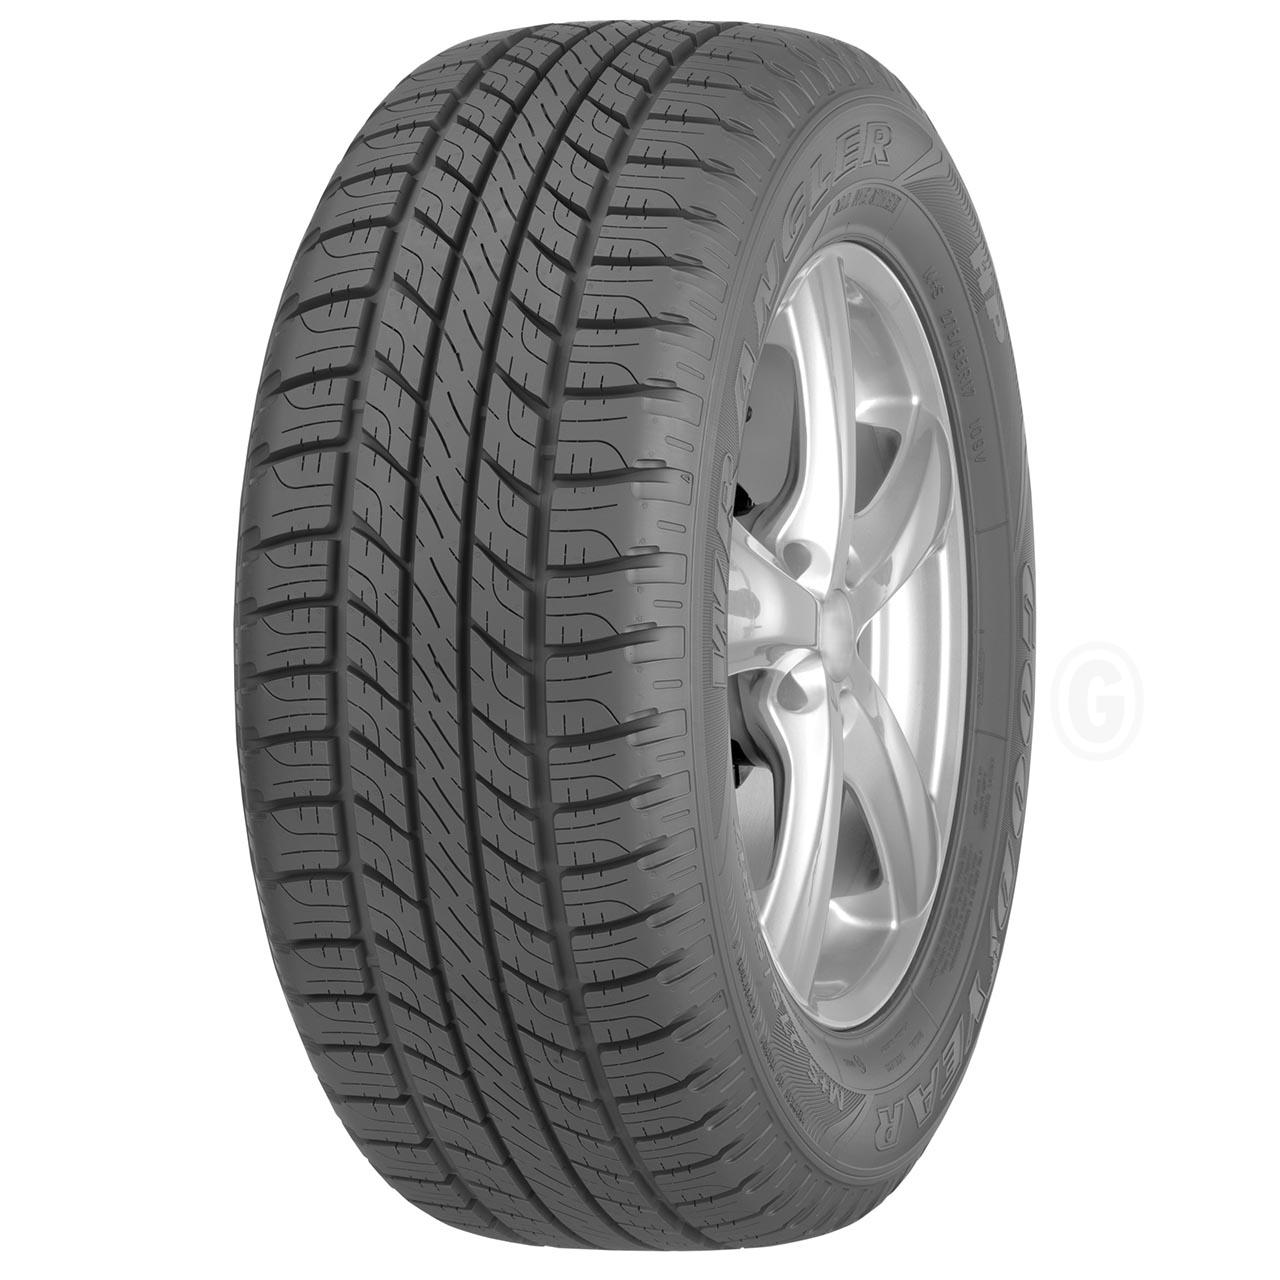 GOODYEAR WRANGLER HP ALL WEATHER